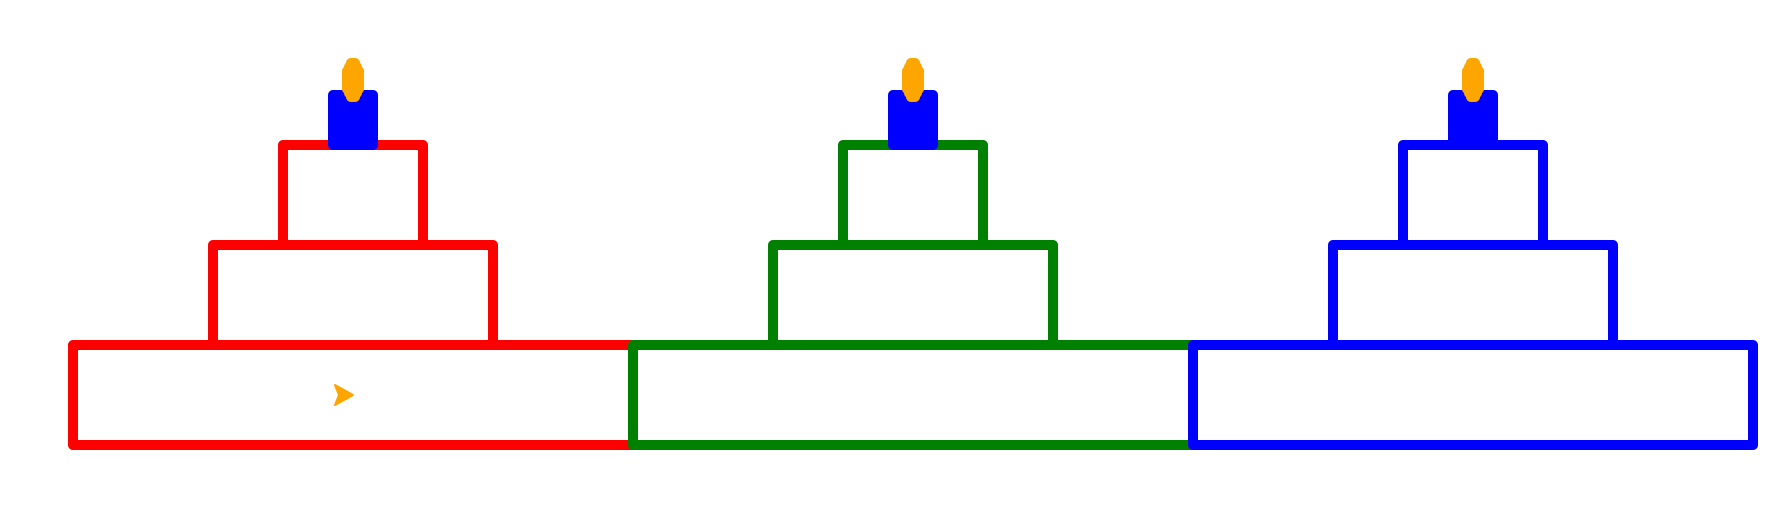 Three three-layer cakes in a row, in red, green, and then blue. The cakes' bottom layers are touching end to end. The turtle is in the center of the first cake, facing to the right (which is the direction the other two cakes are positioned in.